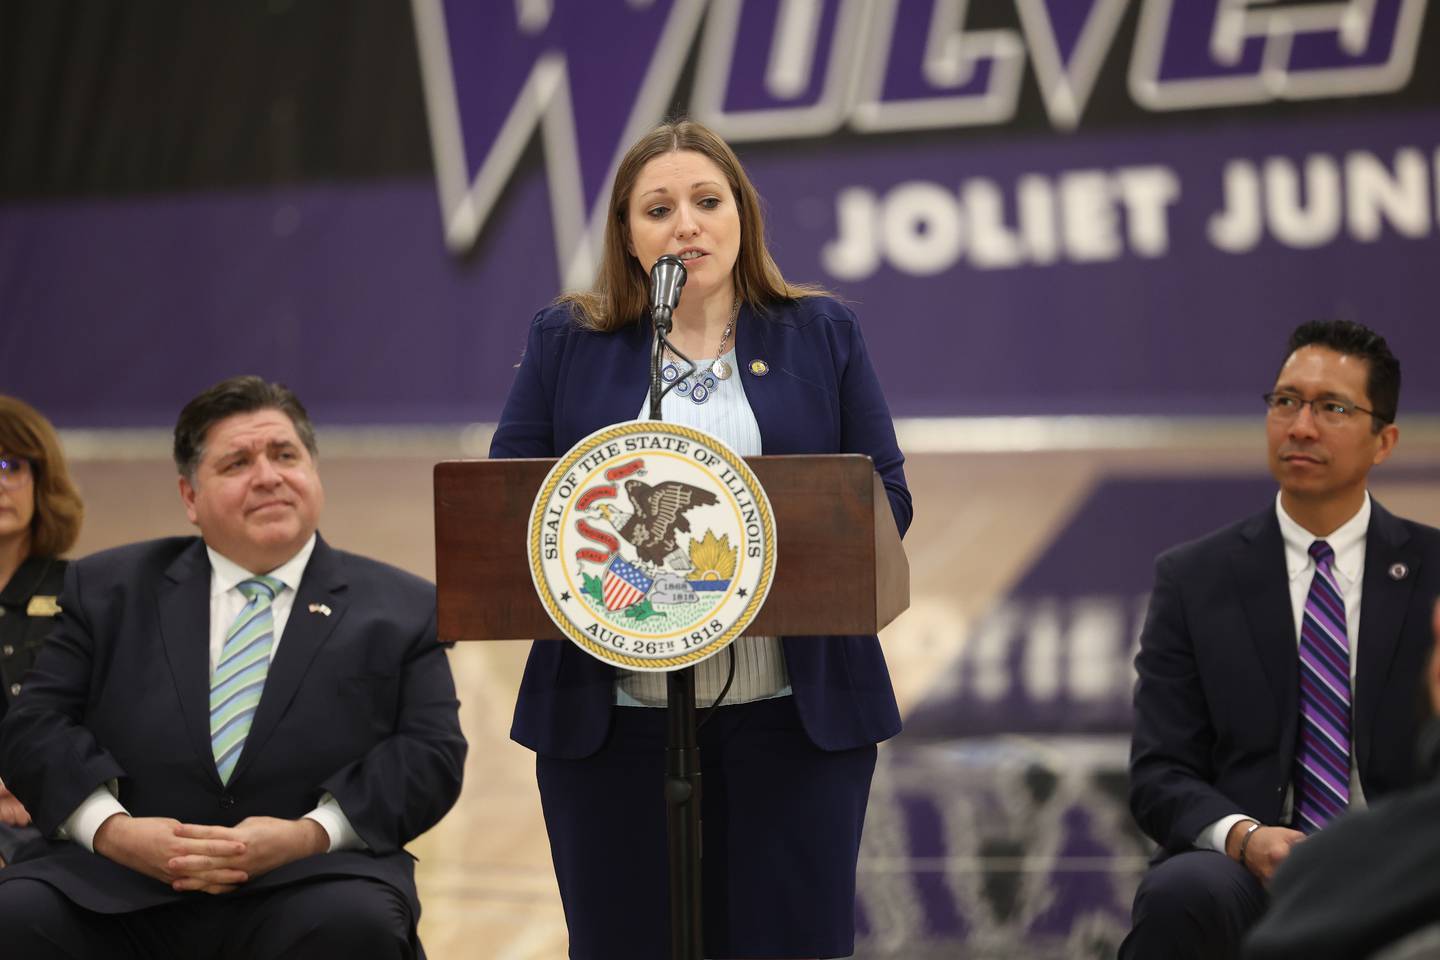 State Sen. Rachel Ventura speaks at a press conference regarding the state’s proposed investment in higher education at Joliet Junior College on Thursday, March 16th, 2023.